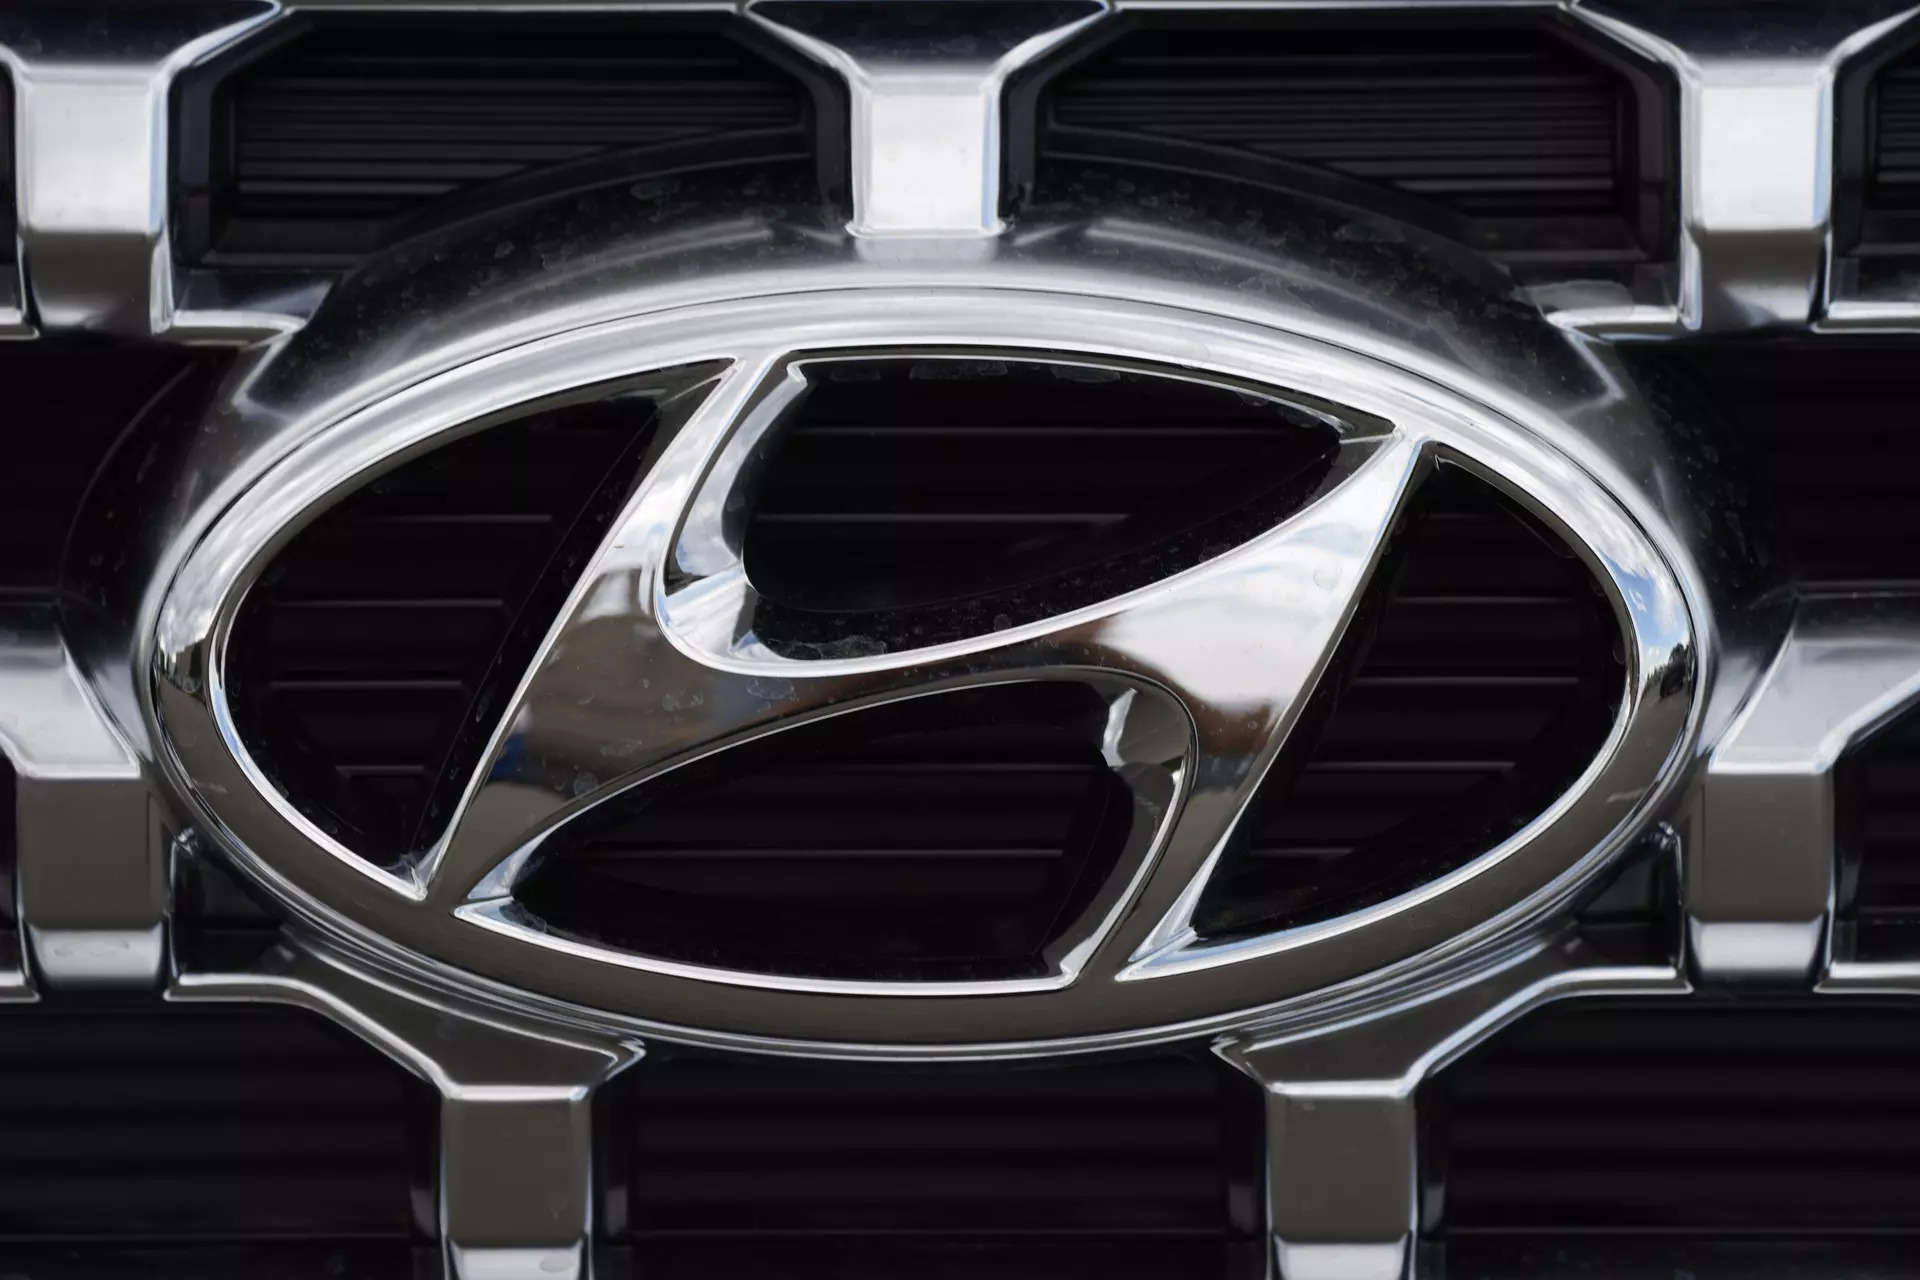 Hyundai goes all in for top-tier EV leadership